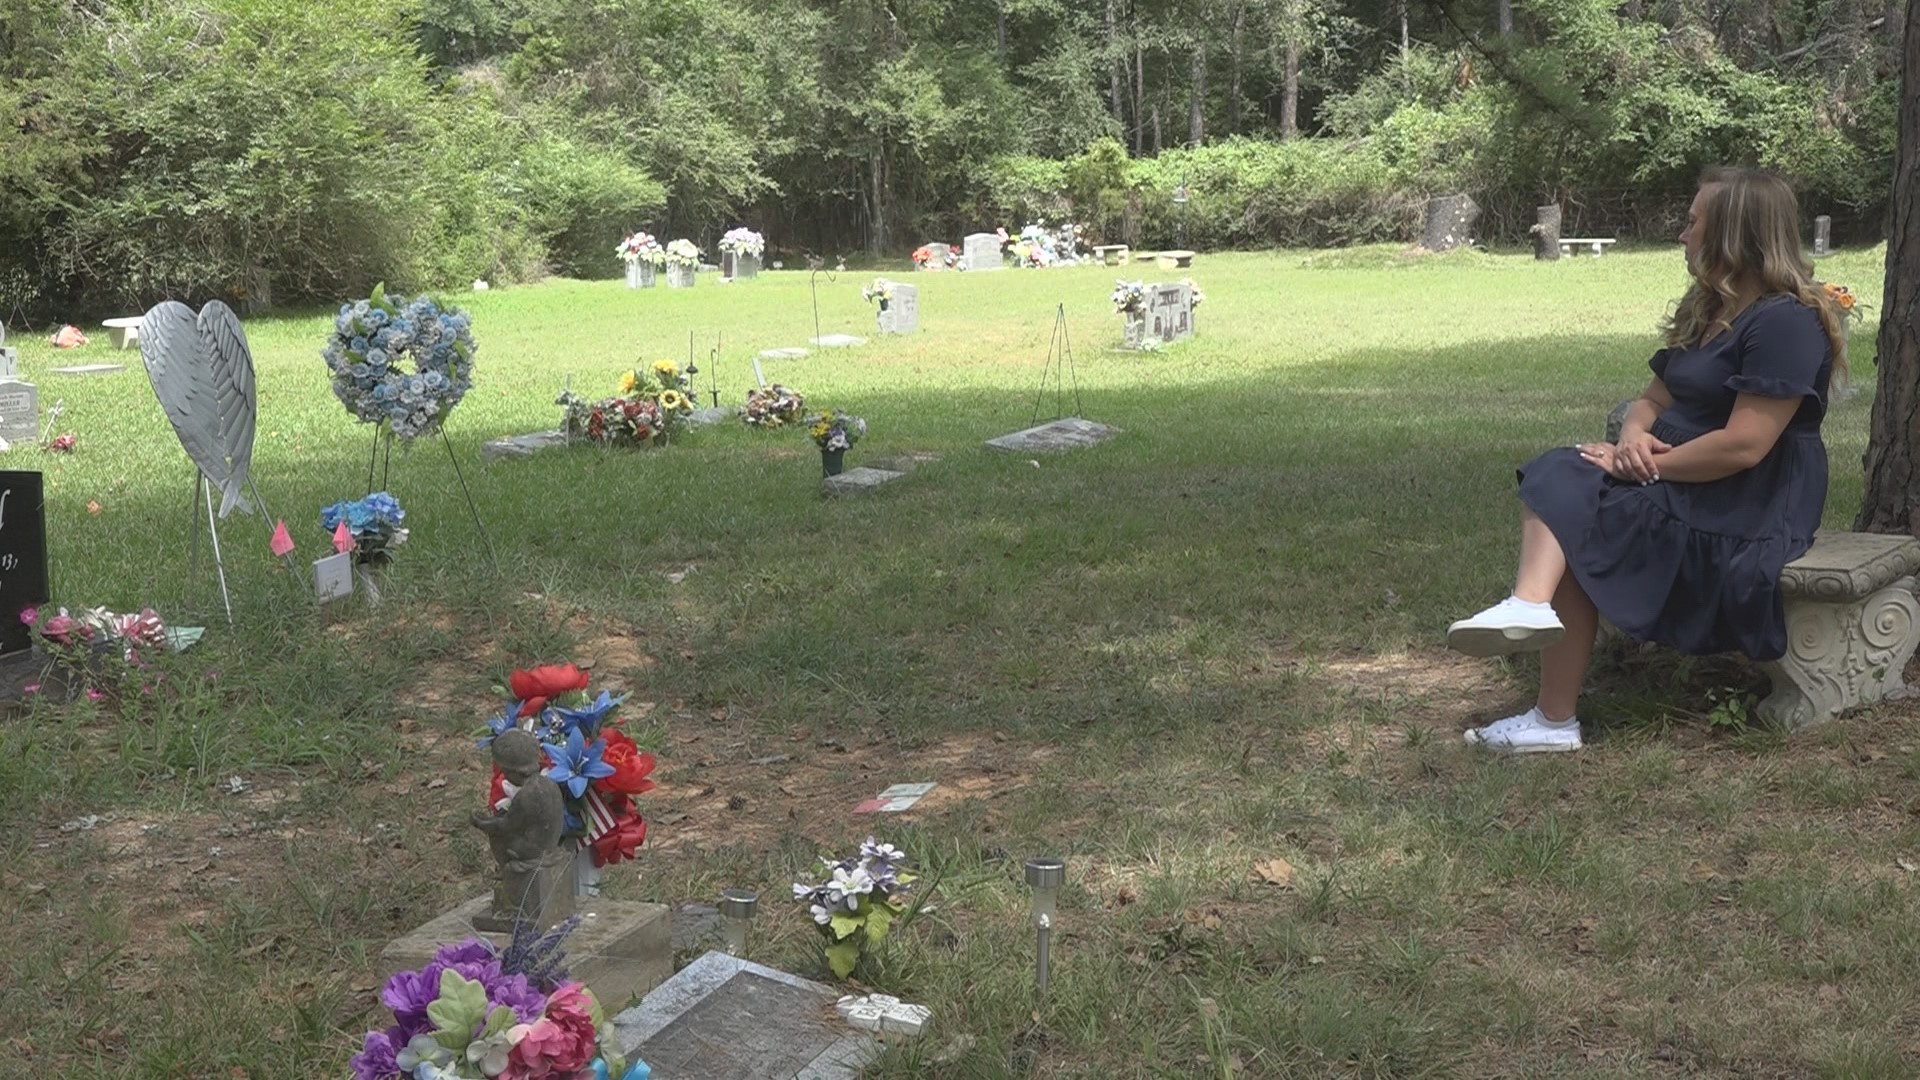 River Valley mom whose baby died buys headstone but never gets it.